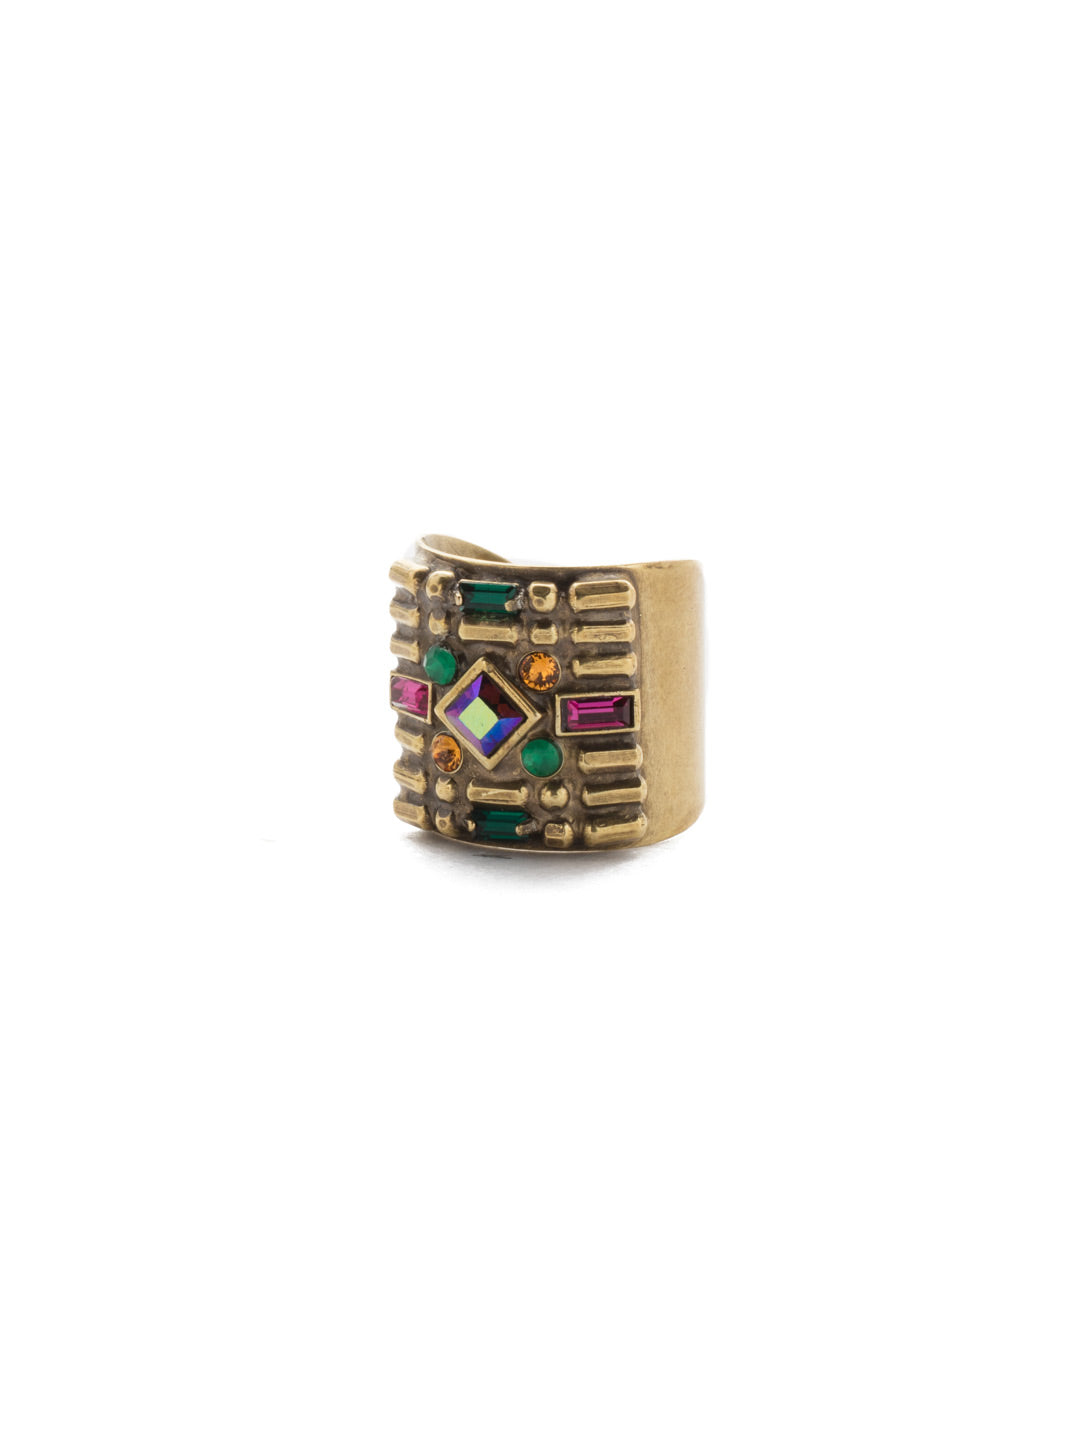 Lyanna Ring - REF7AGGOT - This ring can make a sparkling addition to your stack, a carved band and a pattern of sparkly gems in round and baguette cut shapes. From Sorrelli's Game of Jewel Tones collection in our Antique Gold-tone finish.